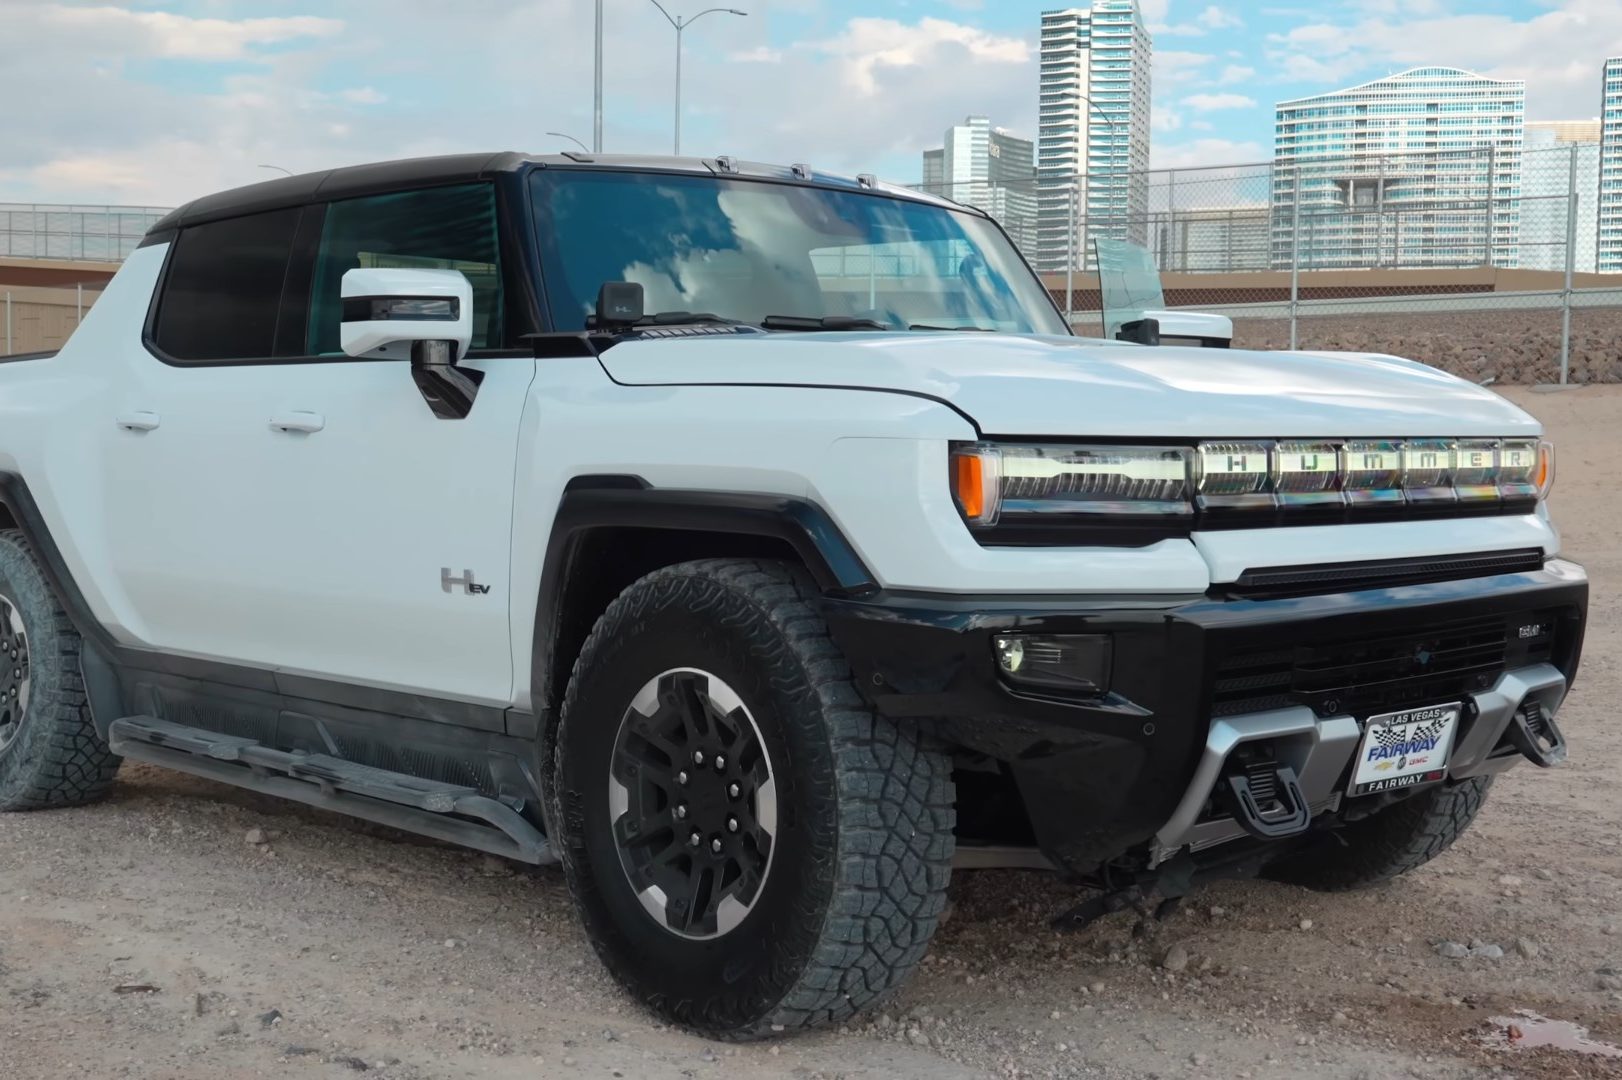 Youtuber manages to break the new GMC Hummer EV in less than 20 km